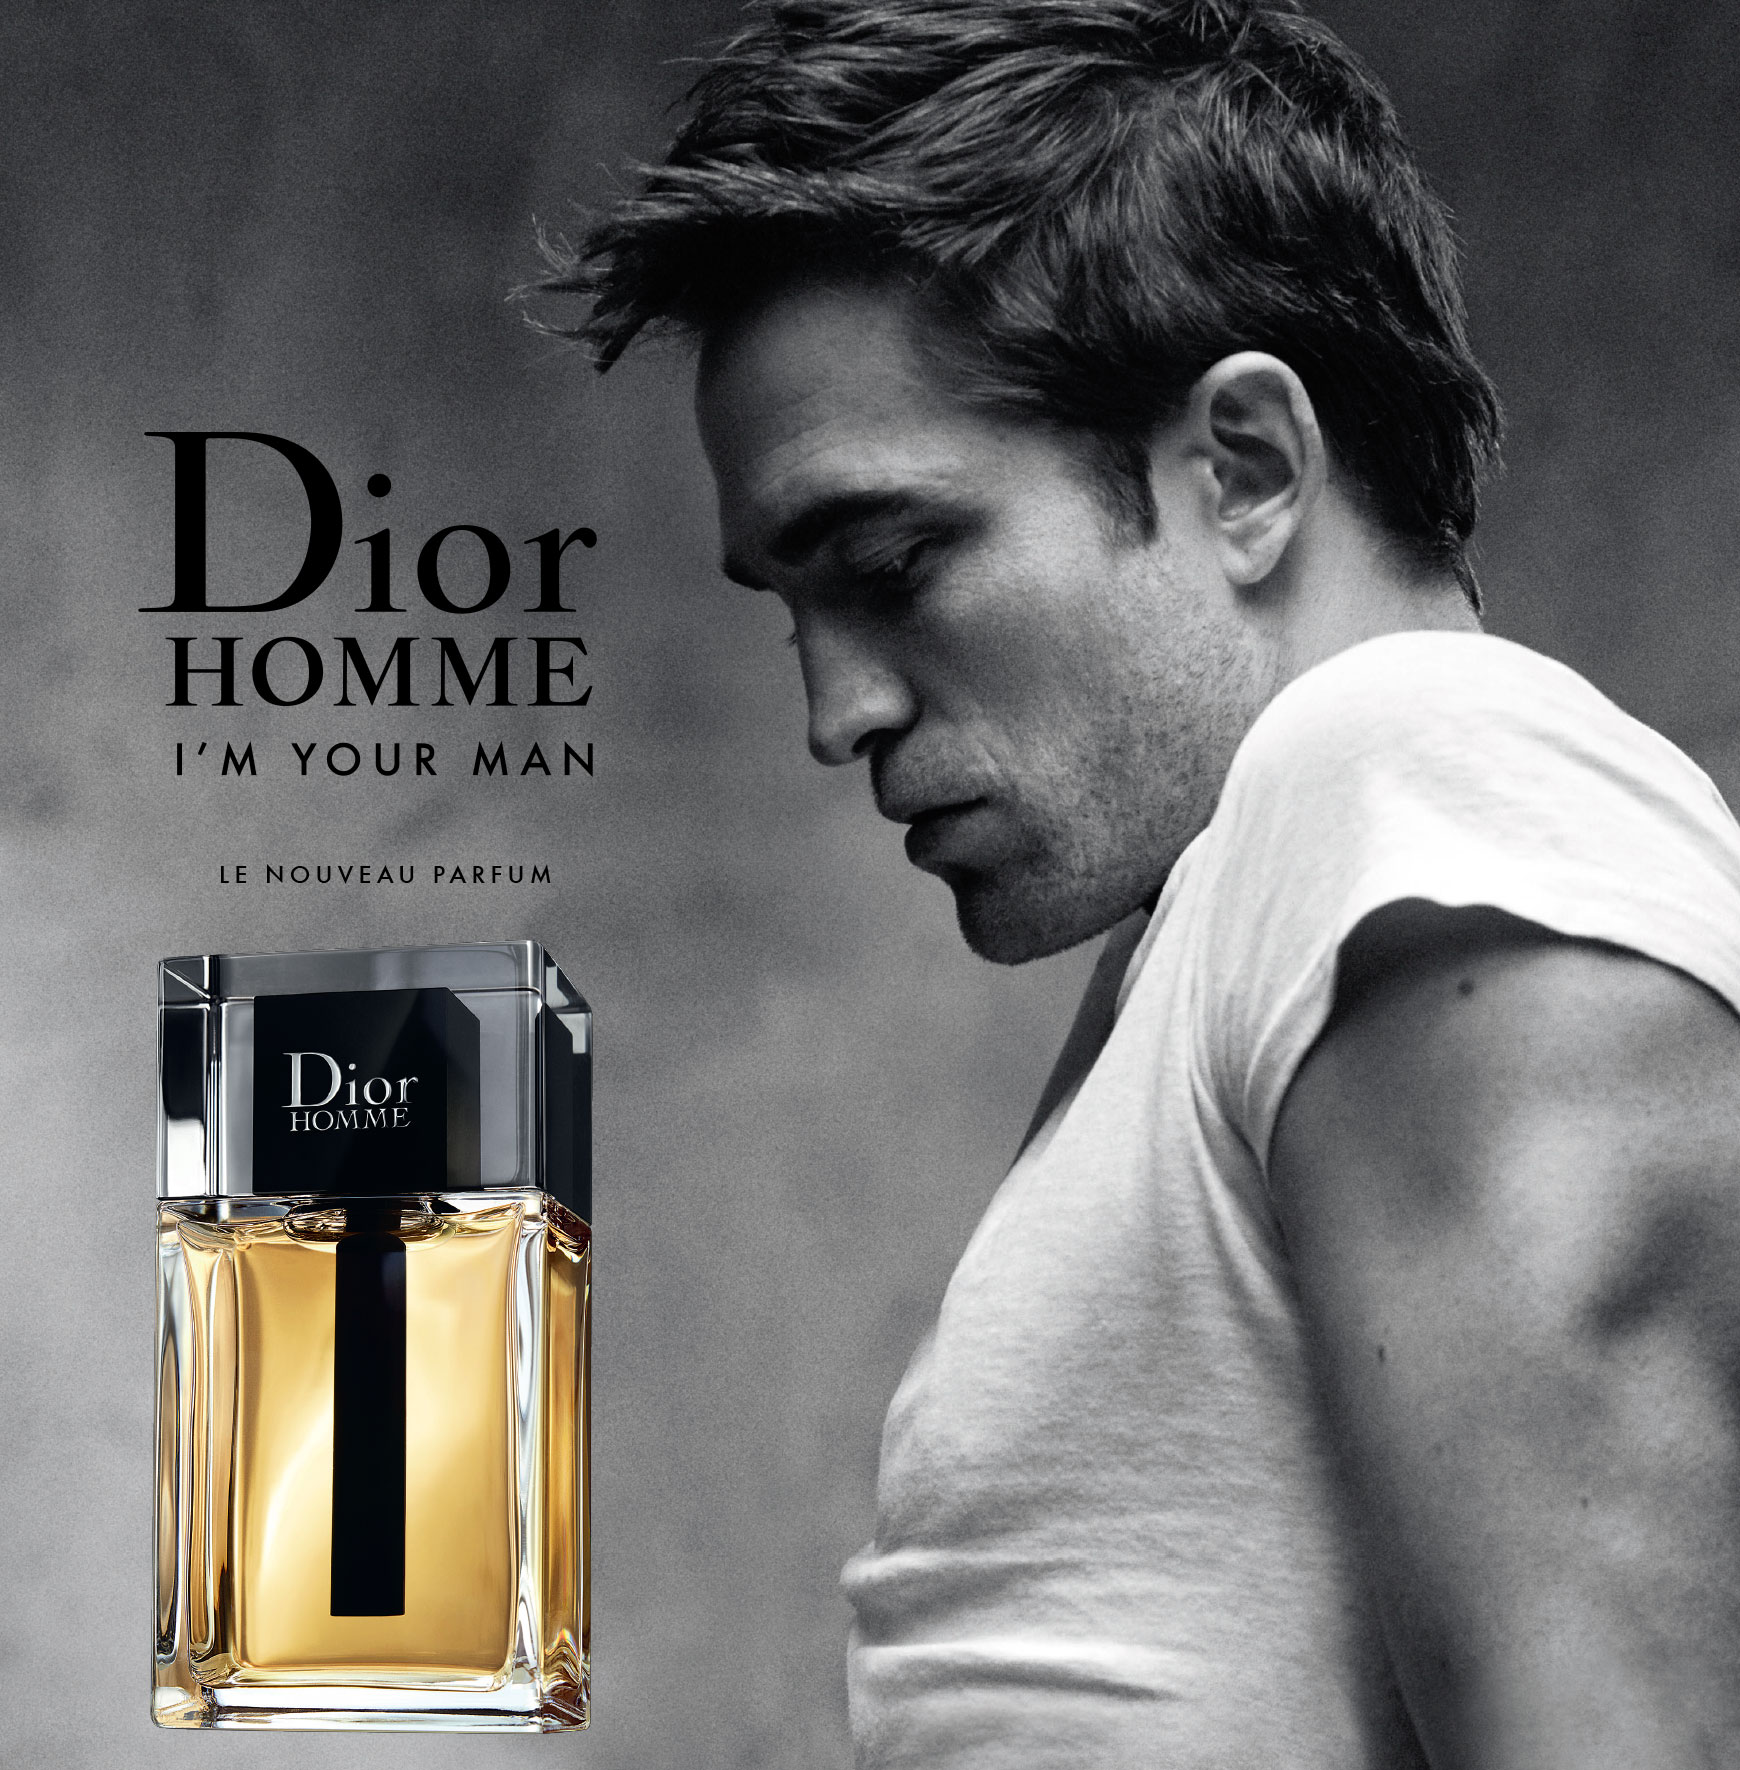 An Objective Review of Dior Homme 2020 